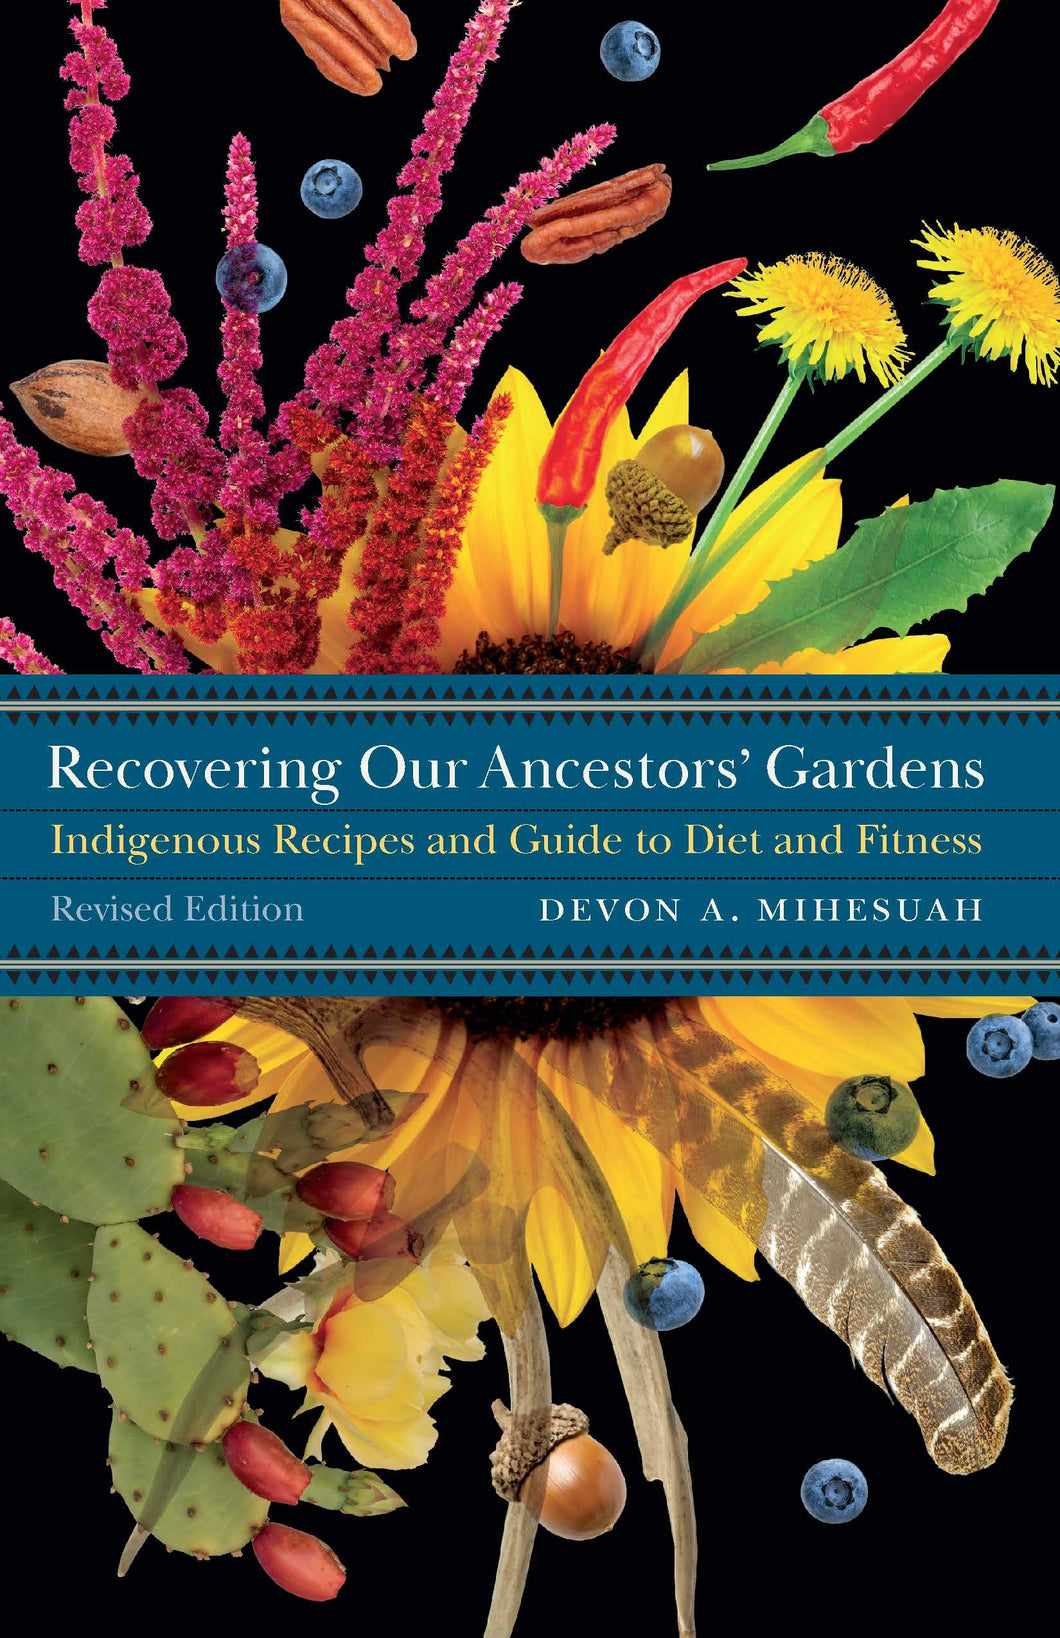 Recovering Our Ancestors' Gardens: Indigenous Recipes and Guide to Diet and Fitness [Devon Abbott Mihesuah]